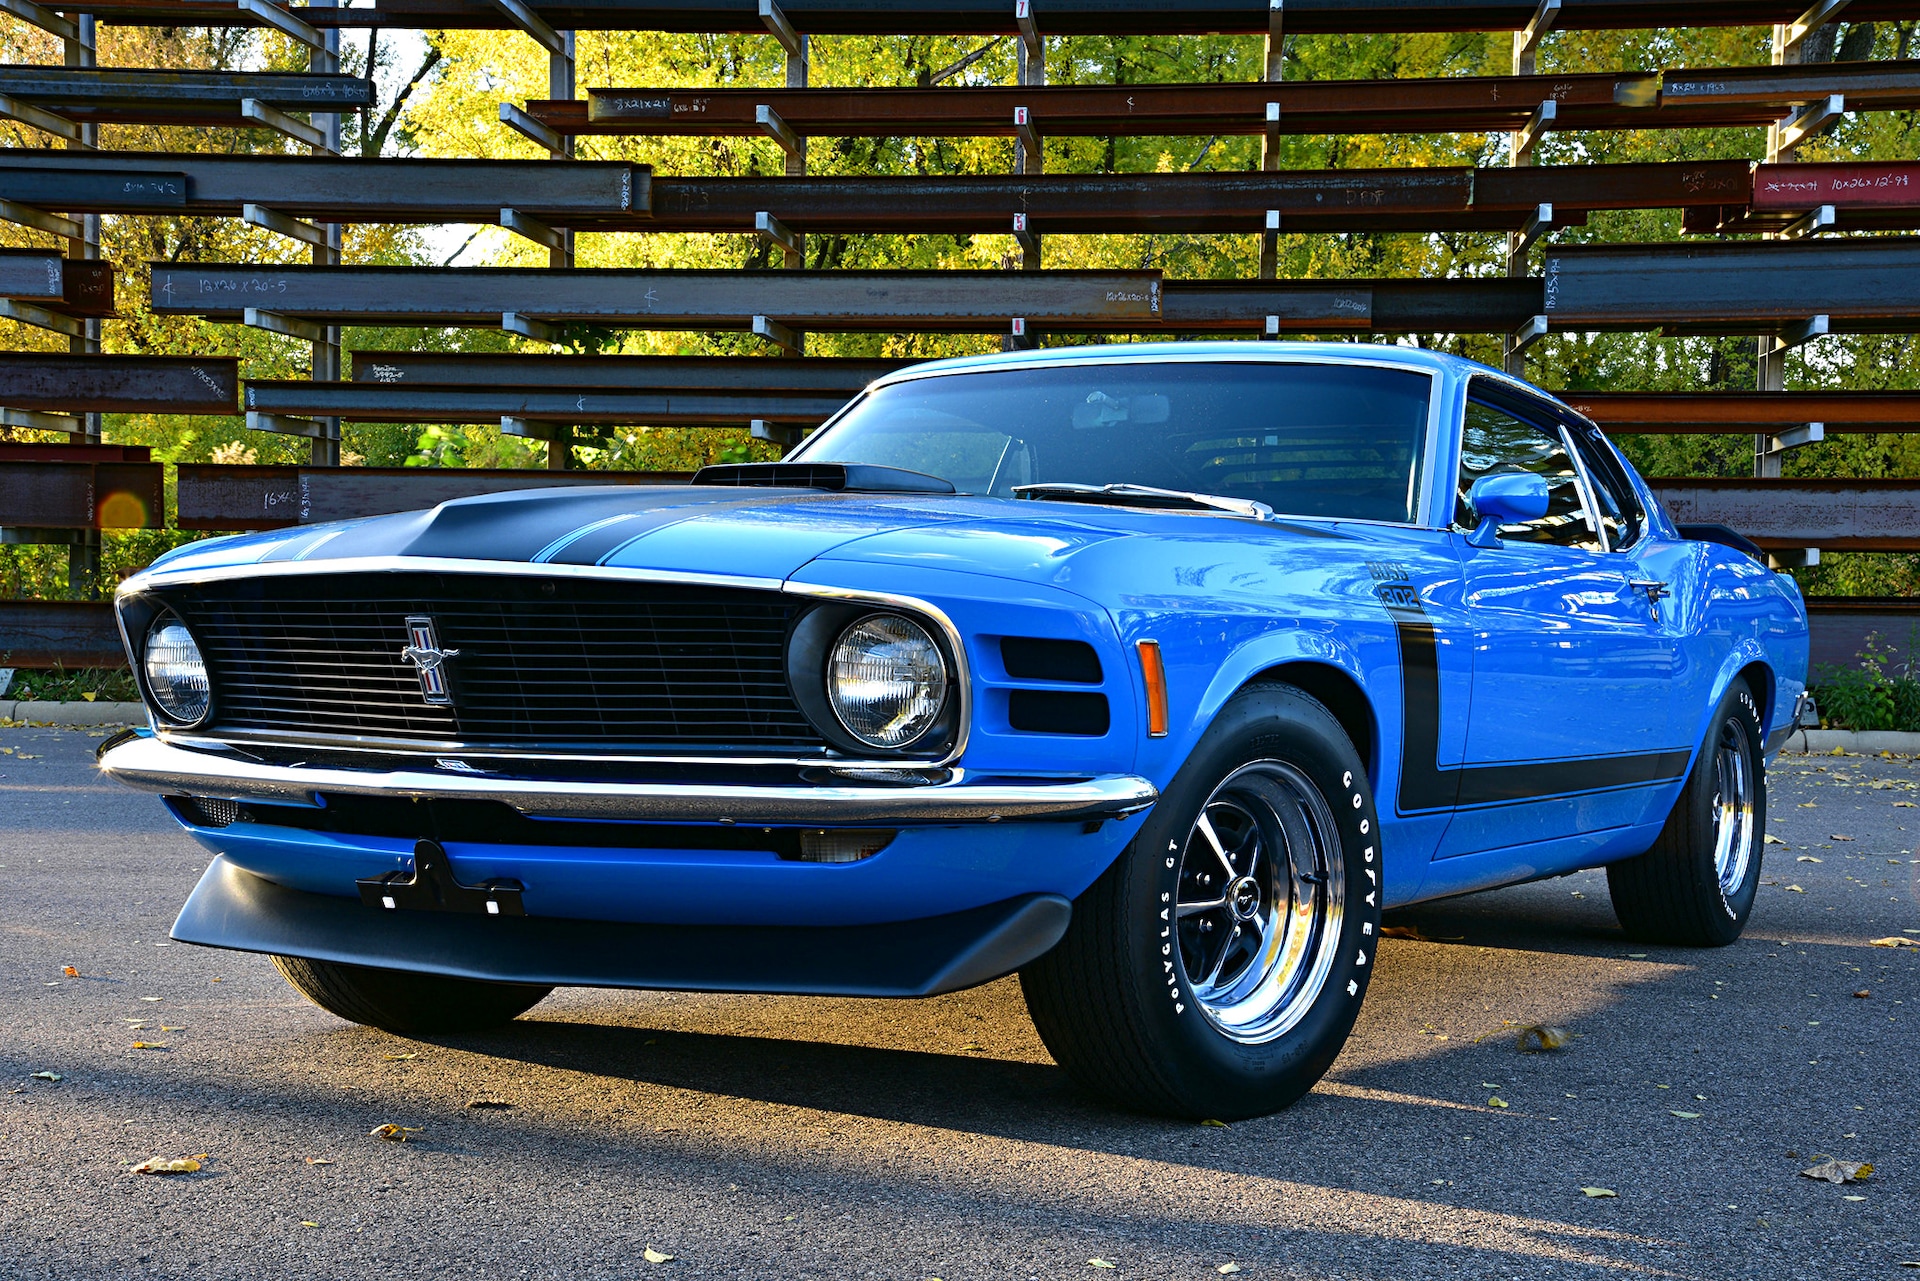 S650 Mustang Official GRABBER BLUE Mustang S650 Thread eke-1970-ford-mustang-boss-302-front-three-quarter